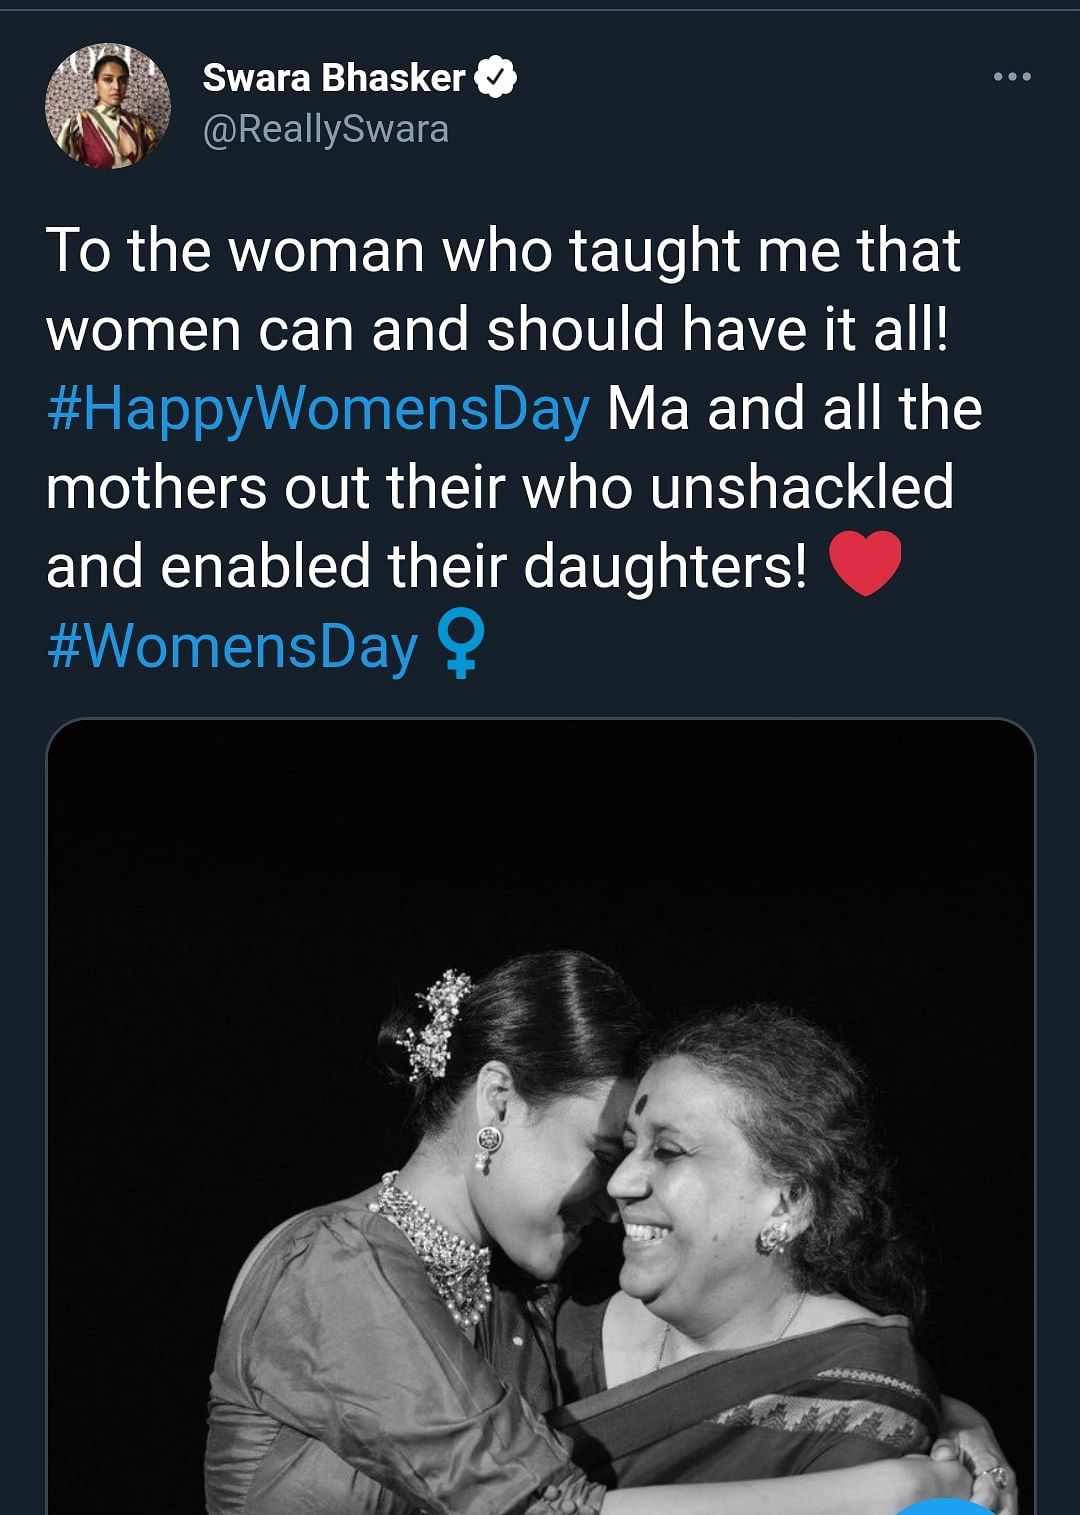 Swara Bhaskar, Taapsee Pannu, Anushka Sharma shared pictures with their mothers